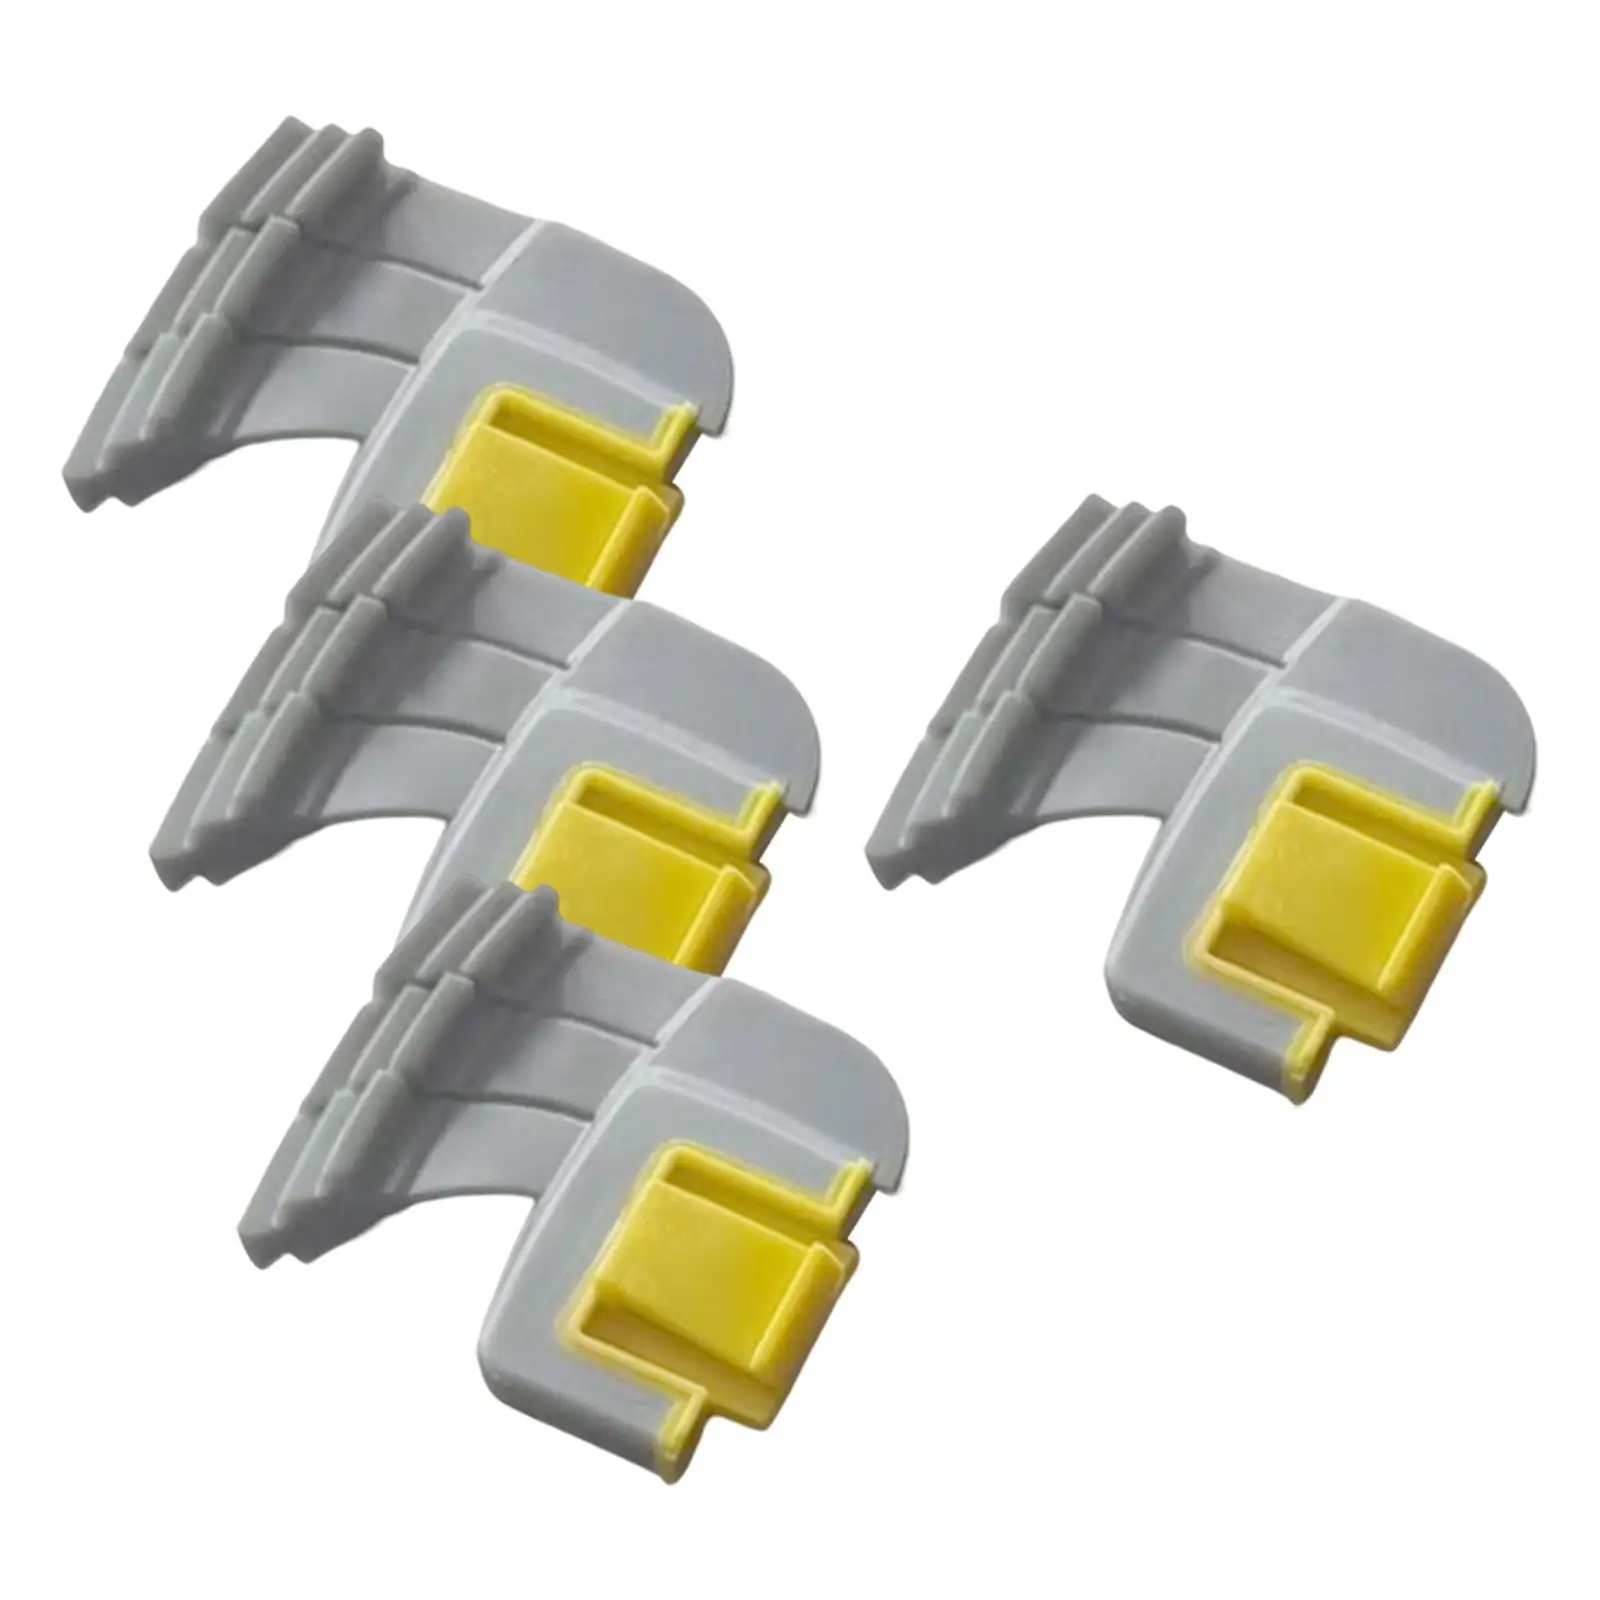 4x Cyclonic Scrubbing Brush Pool Brush Replacement Parts for R0714400 Suction Robotic Pool Cleaner Accessories